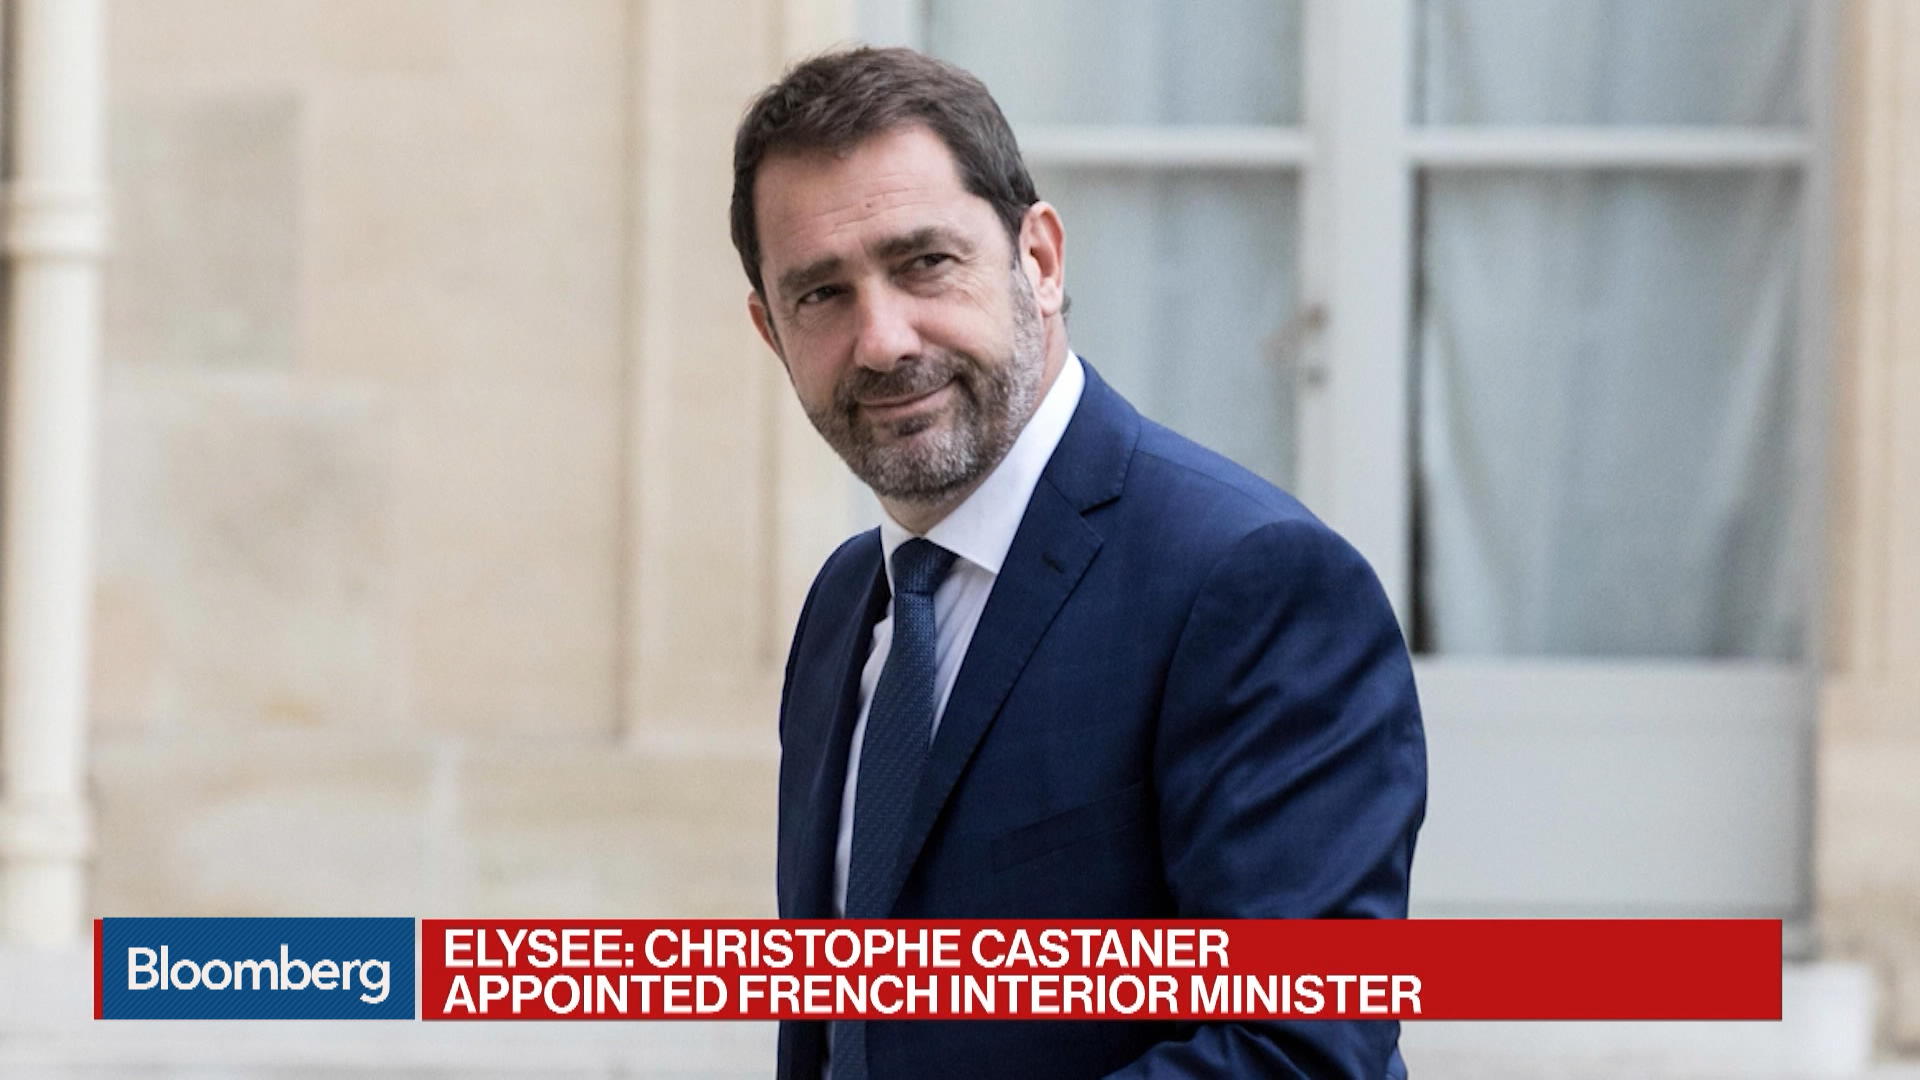 Christophe Castaner Appointed French Interior Minister - Bloomberg